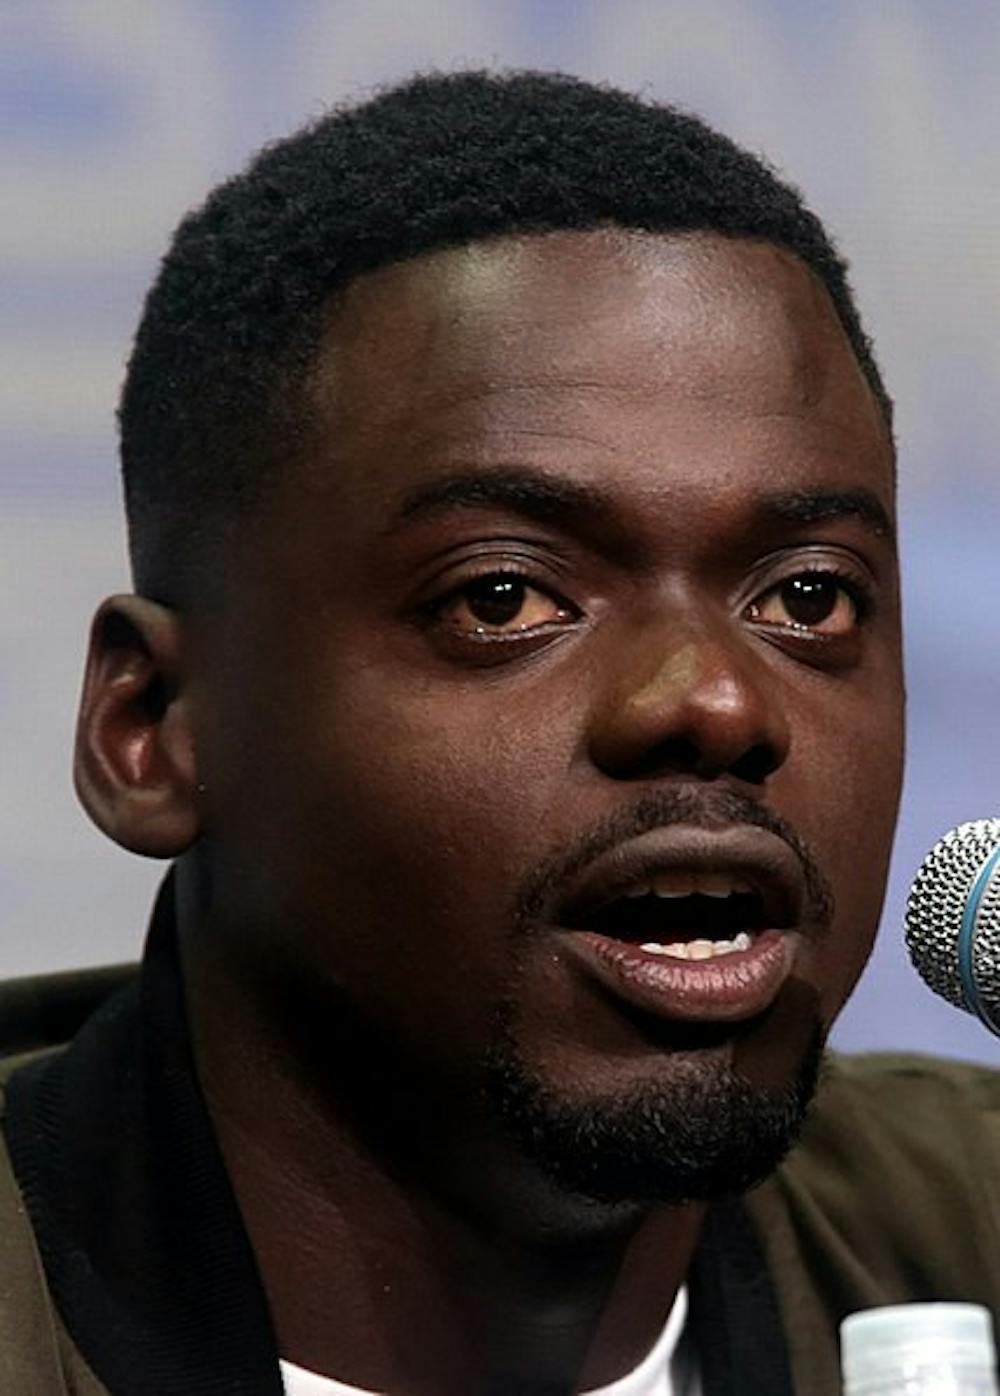 GAGE SKIDMORE/CC BY-SA 2.0
Daniel Kaluuya plays Black Panther leader Fred Hampton in the film Judas and the Black Messiah.